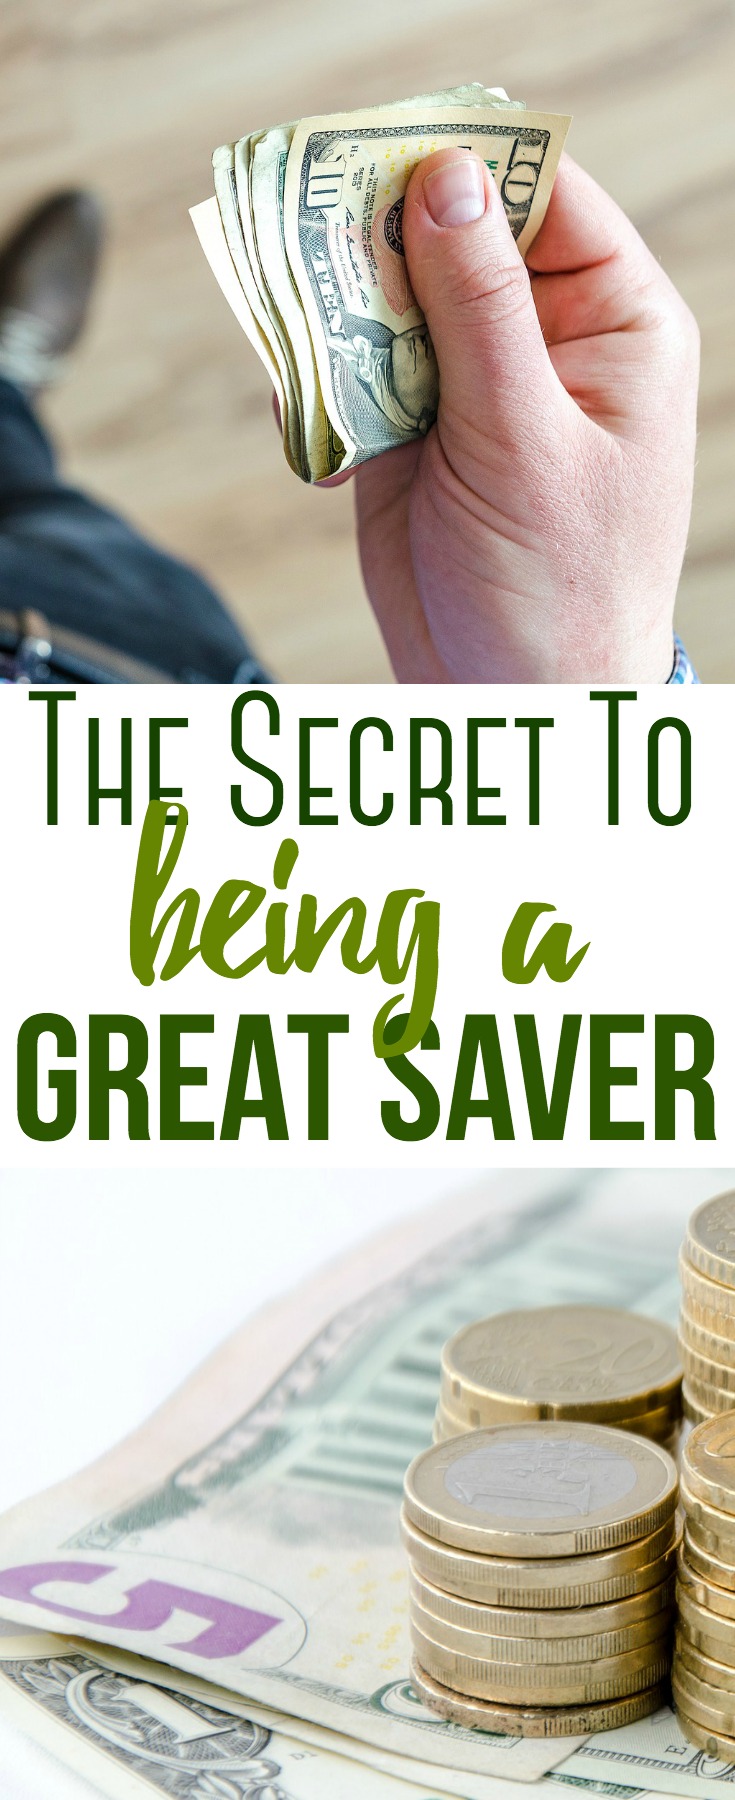 Everyone is looking for an easy solution to help them save. Stop the cycle of living paycheck to paycheck with this simple secret to being a great saver.